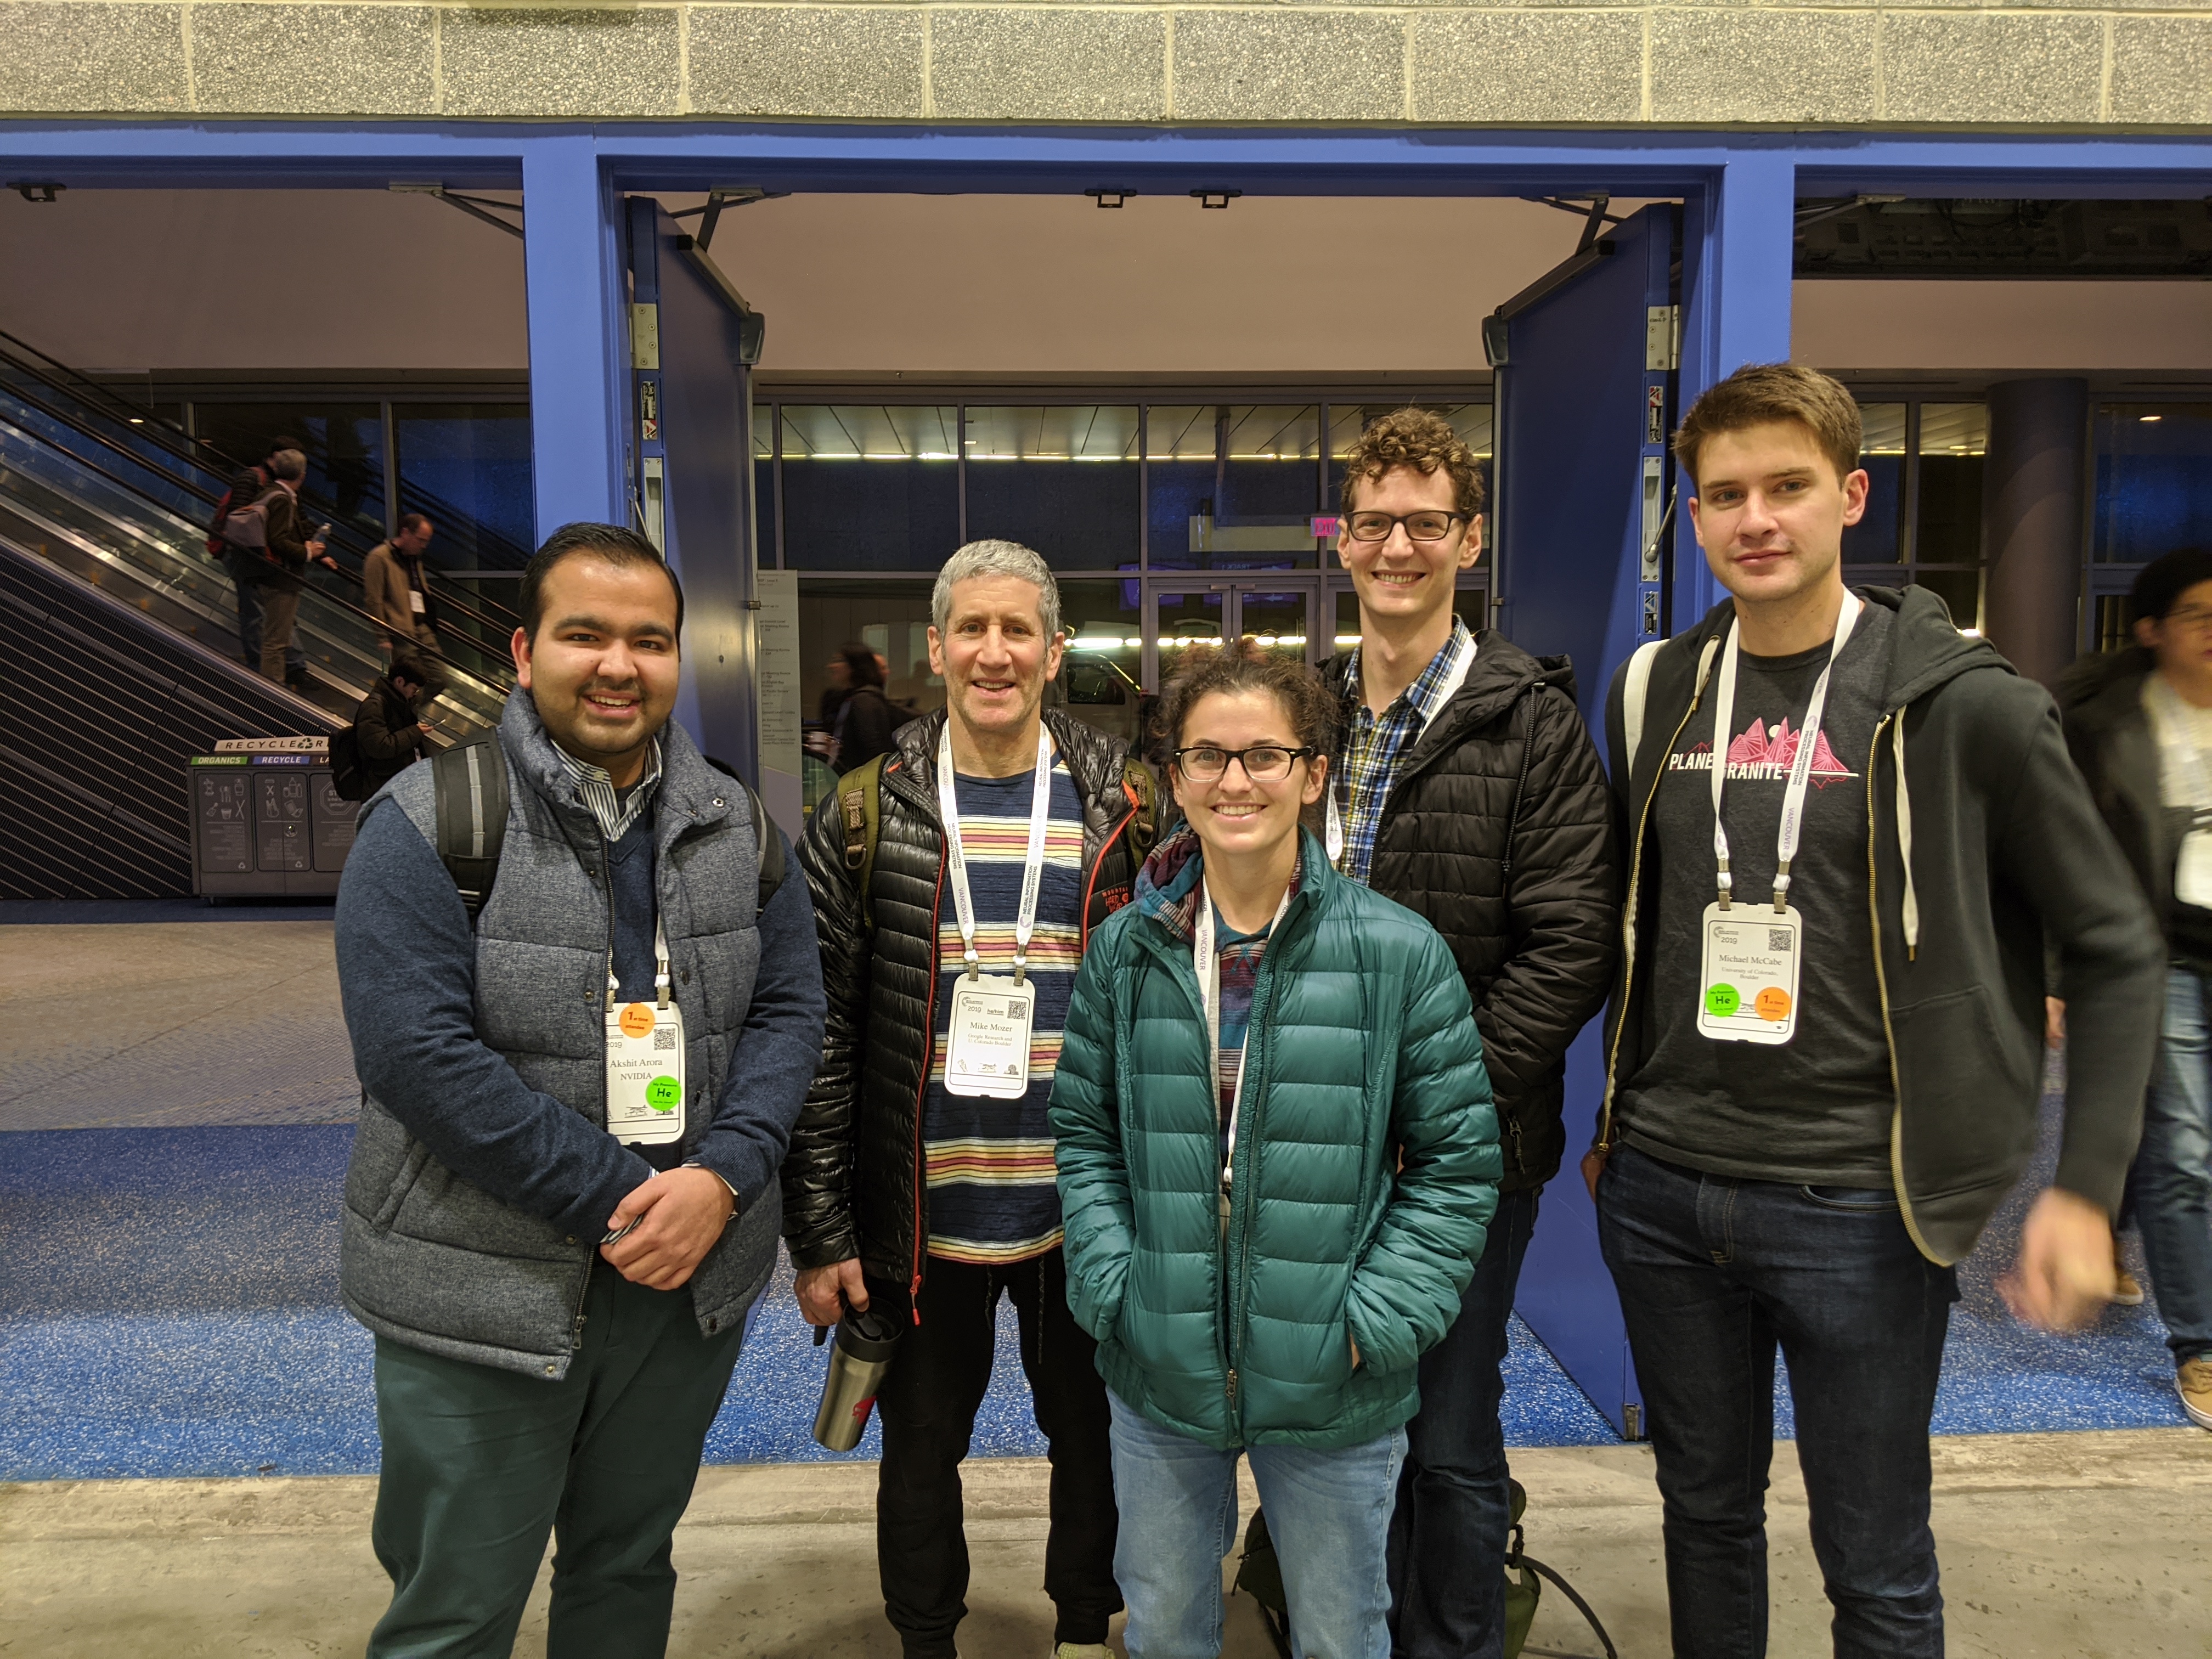 NeurIPS 2019 - Prof. Michael Mozer and other CU Boulder PhD students